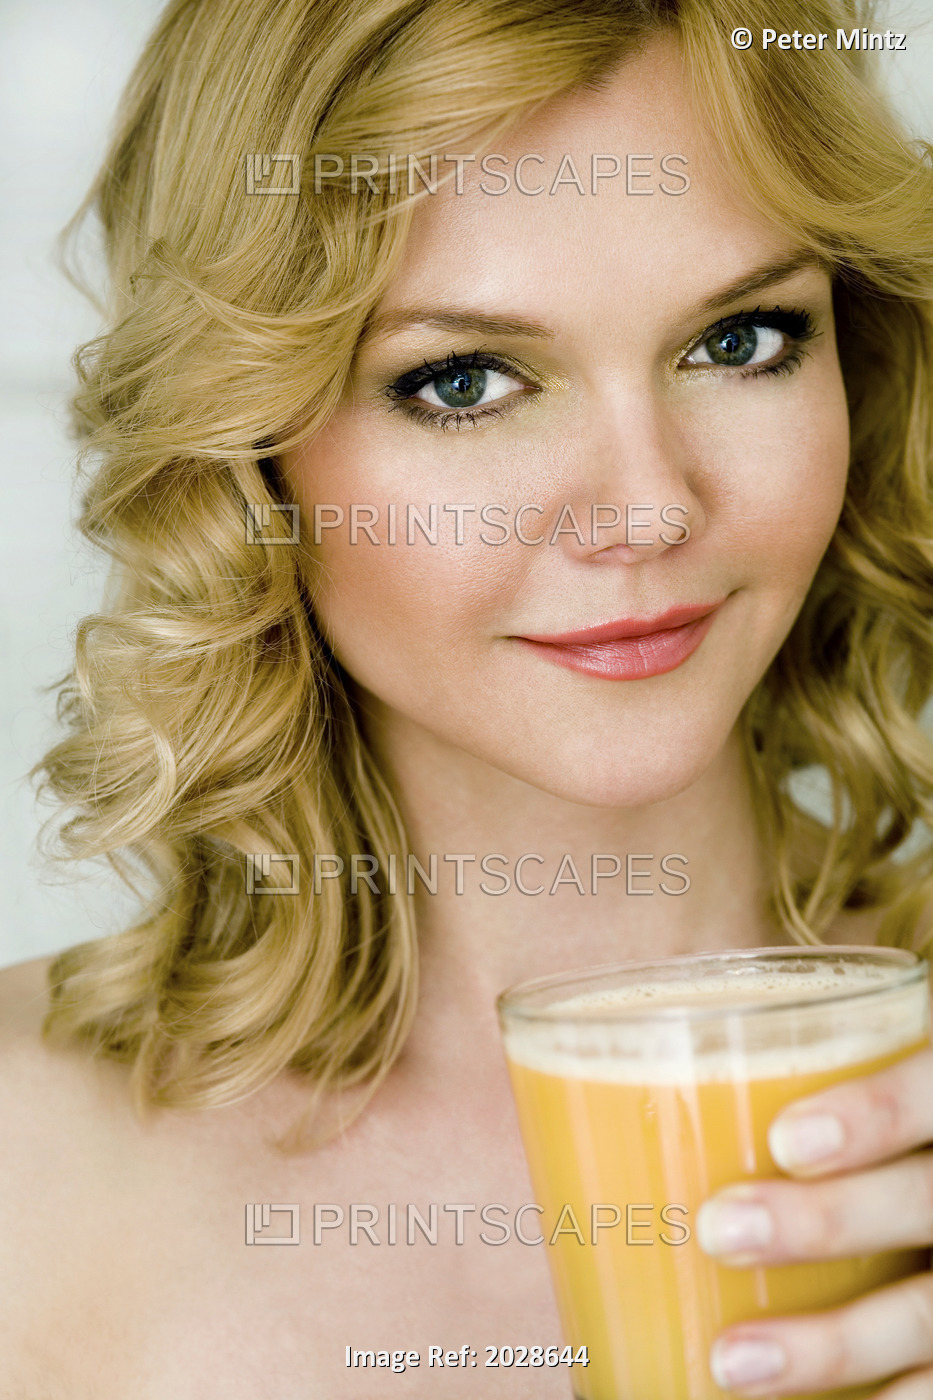 Portrait Of A Woman Holding A Glass Of Orange Juice